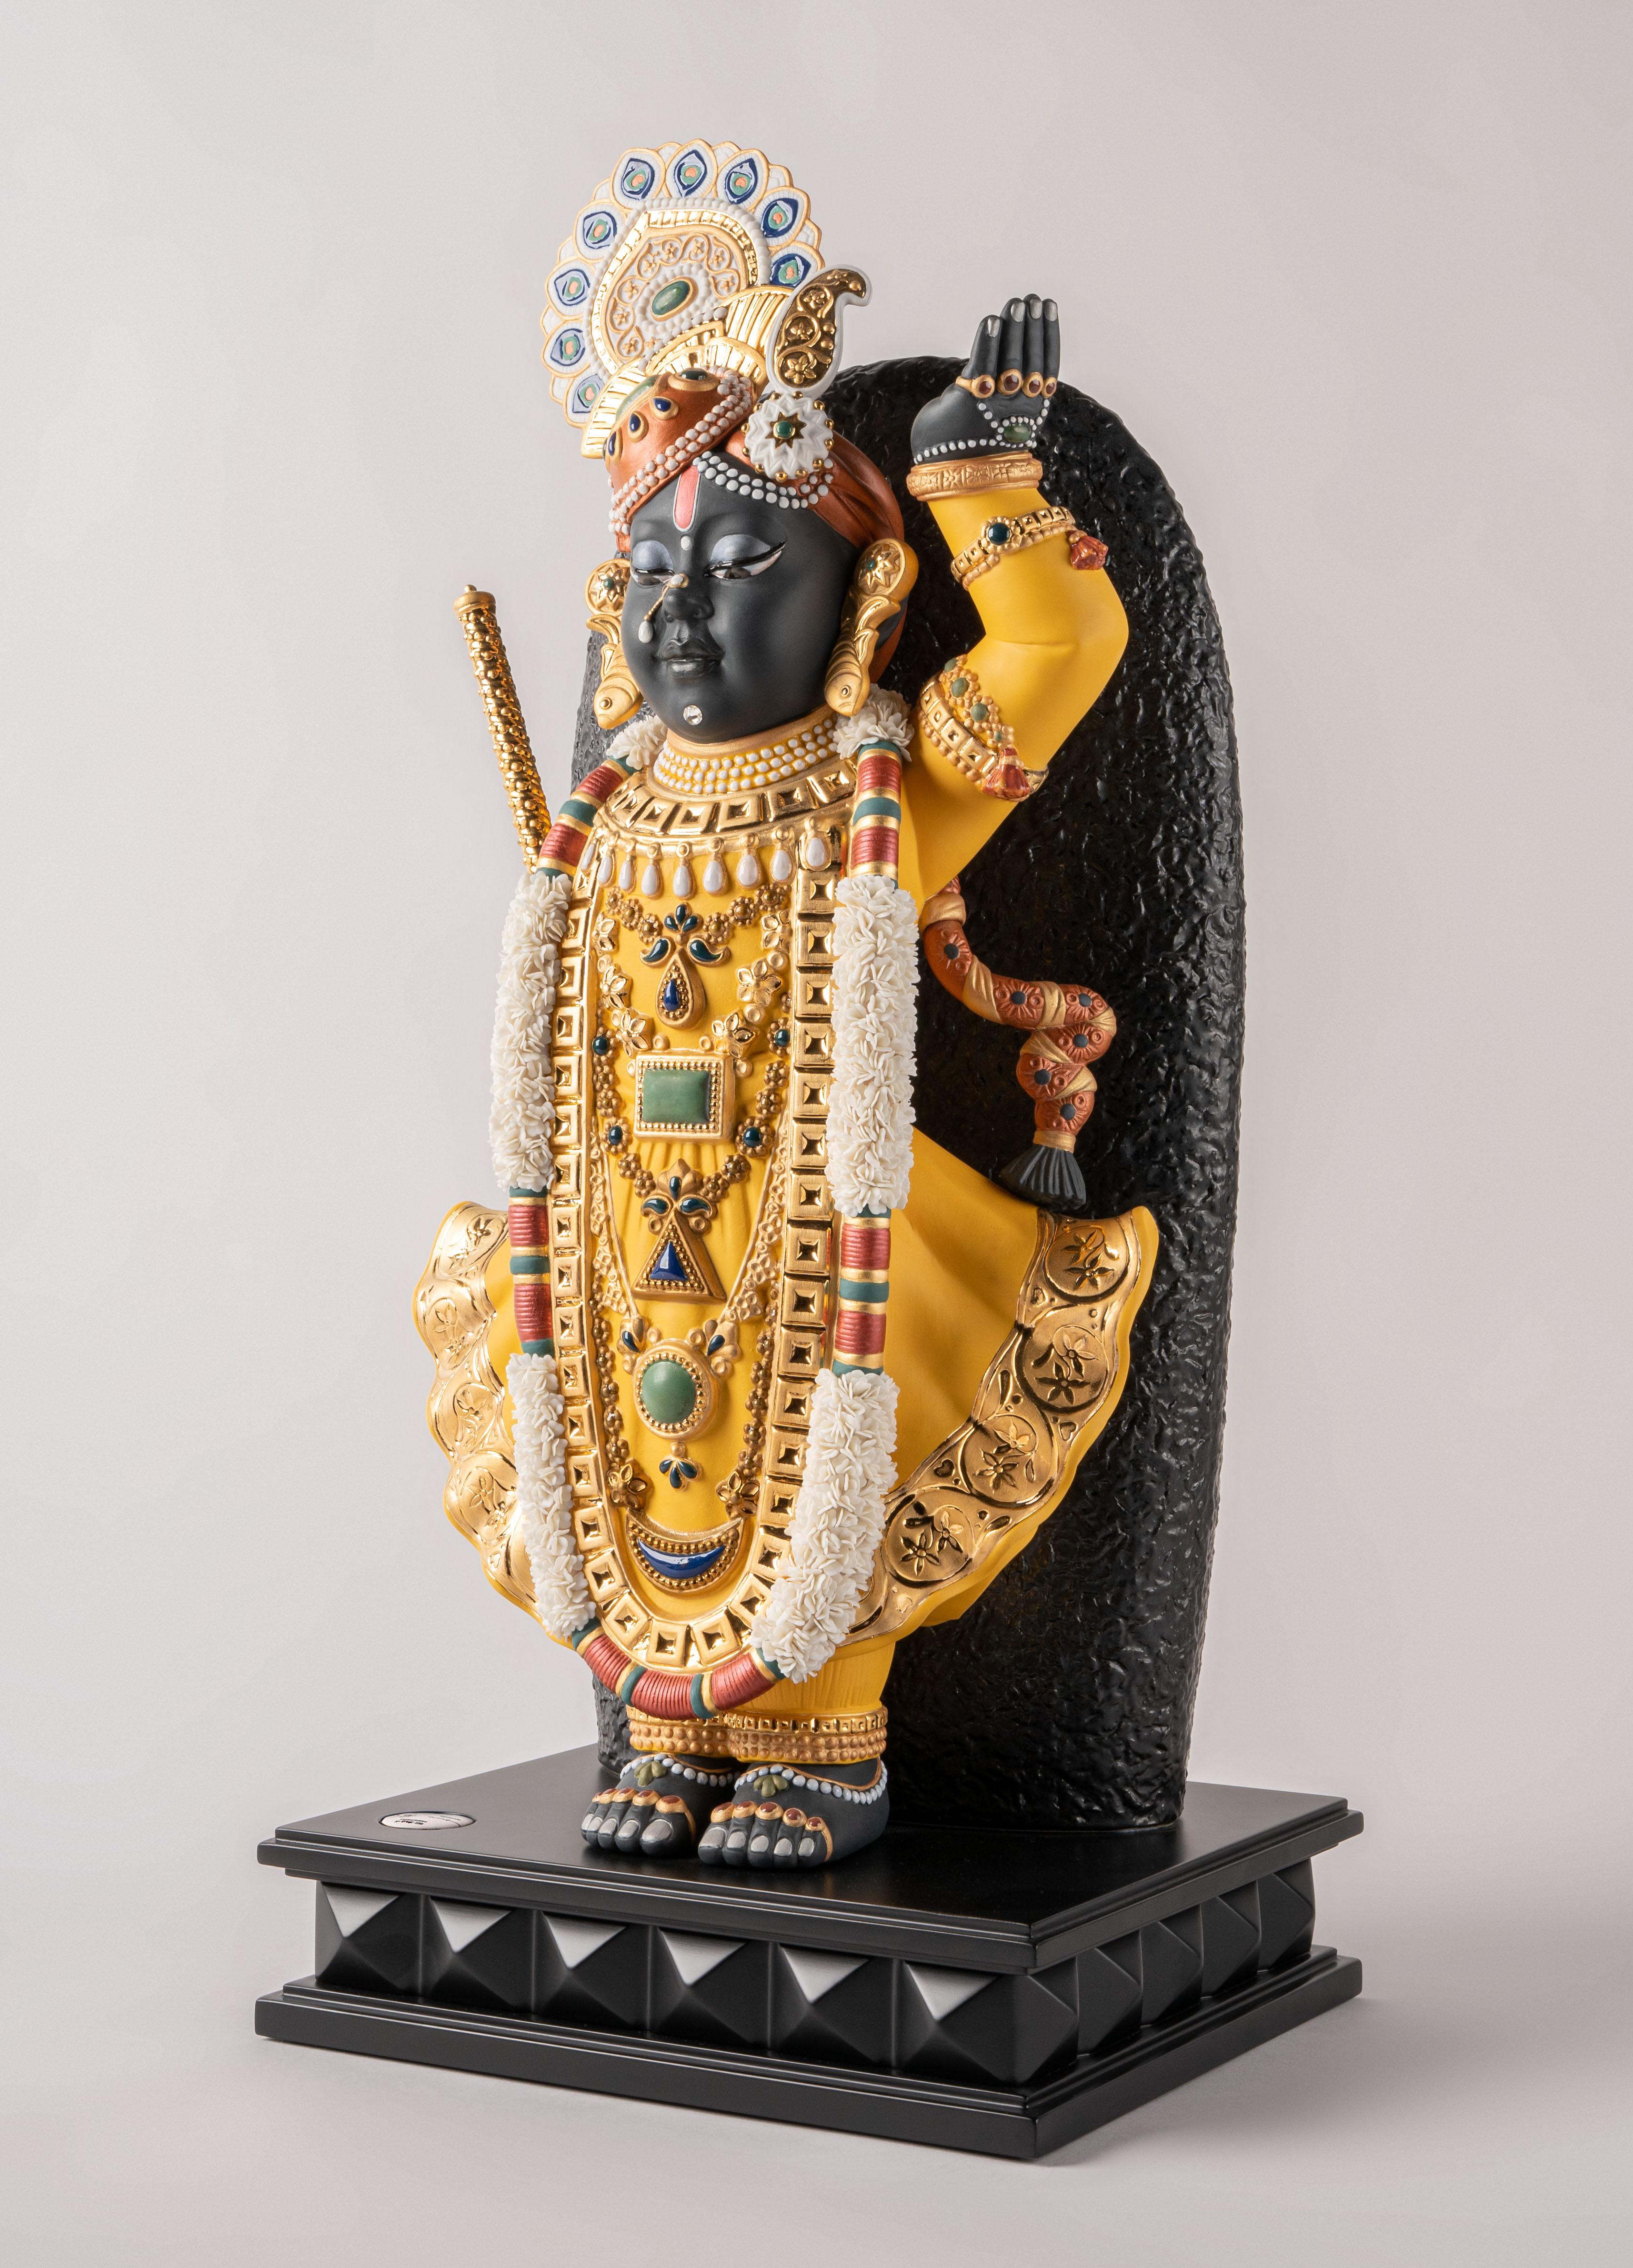 Porcelain sculpture portraying Shrinathji, one of India’s most venerated gods. Shrinathji is a manifestation of Krishna, one of India’s most venerated deities, incarnated in a seven-year-old boy. Shrinathji is a grace-filled divinity, the balanced